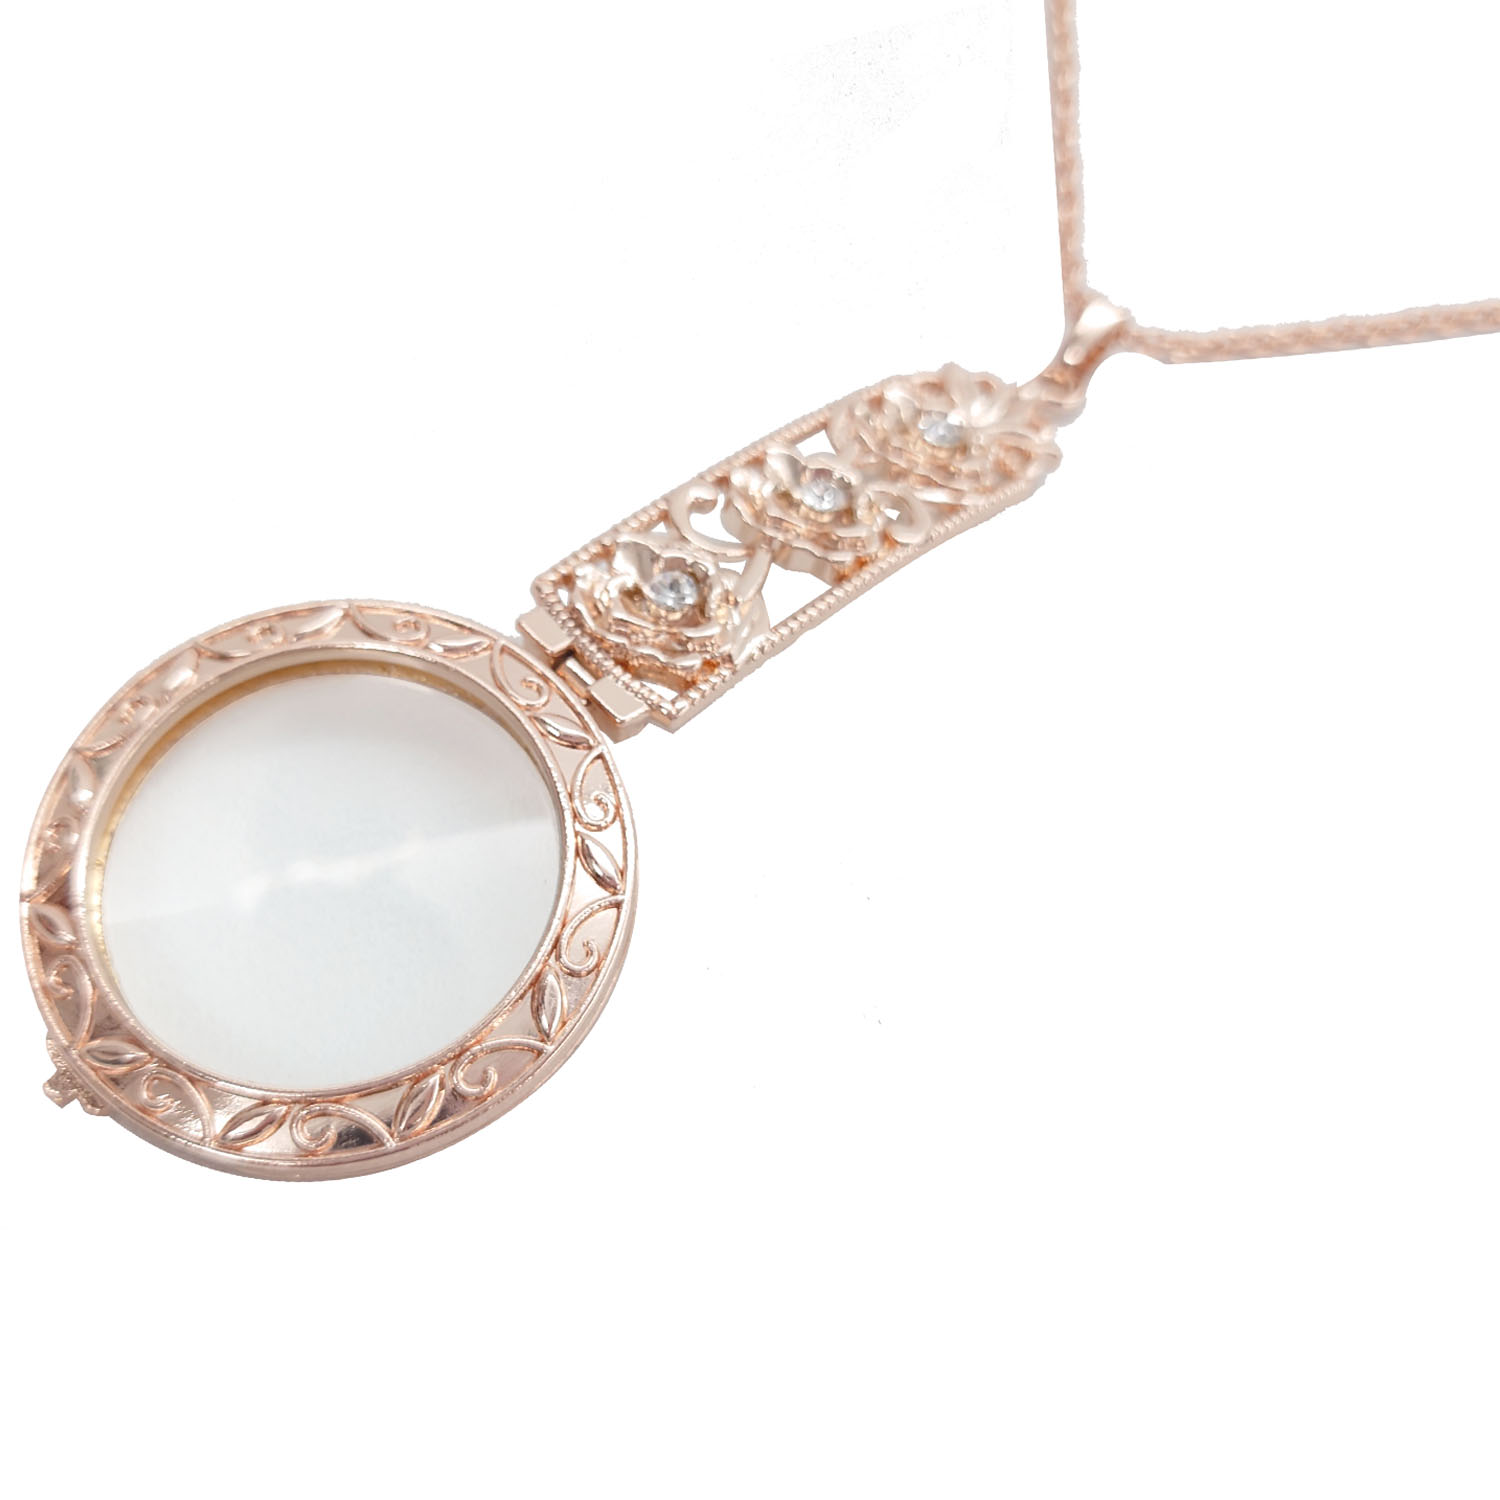 rose gold handle necklace with magnifying glass pendant